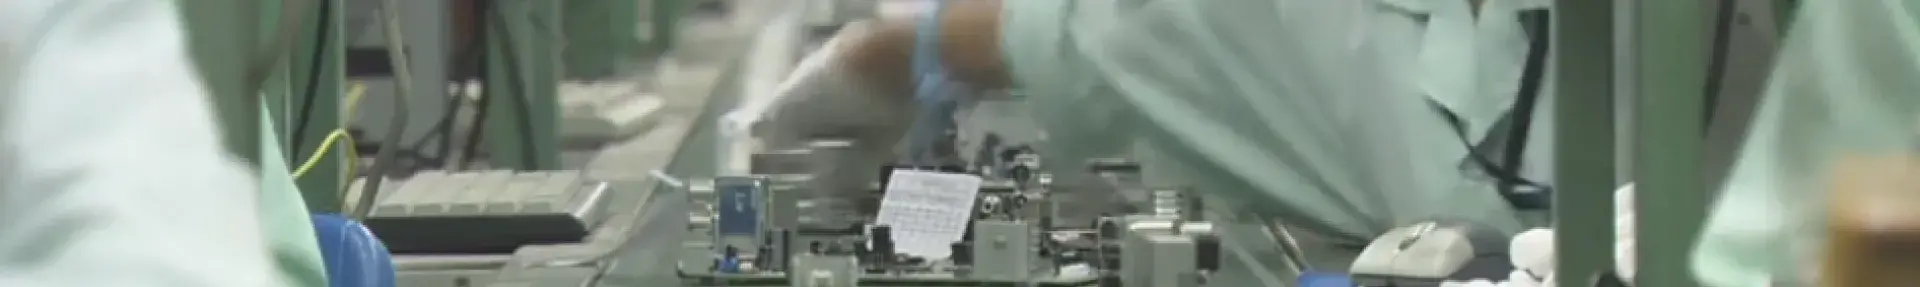 Image: workers on electronics assembly line. Title: End Smartphone Sweatshops